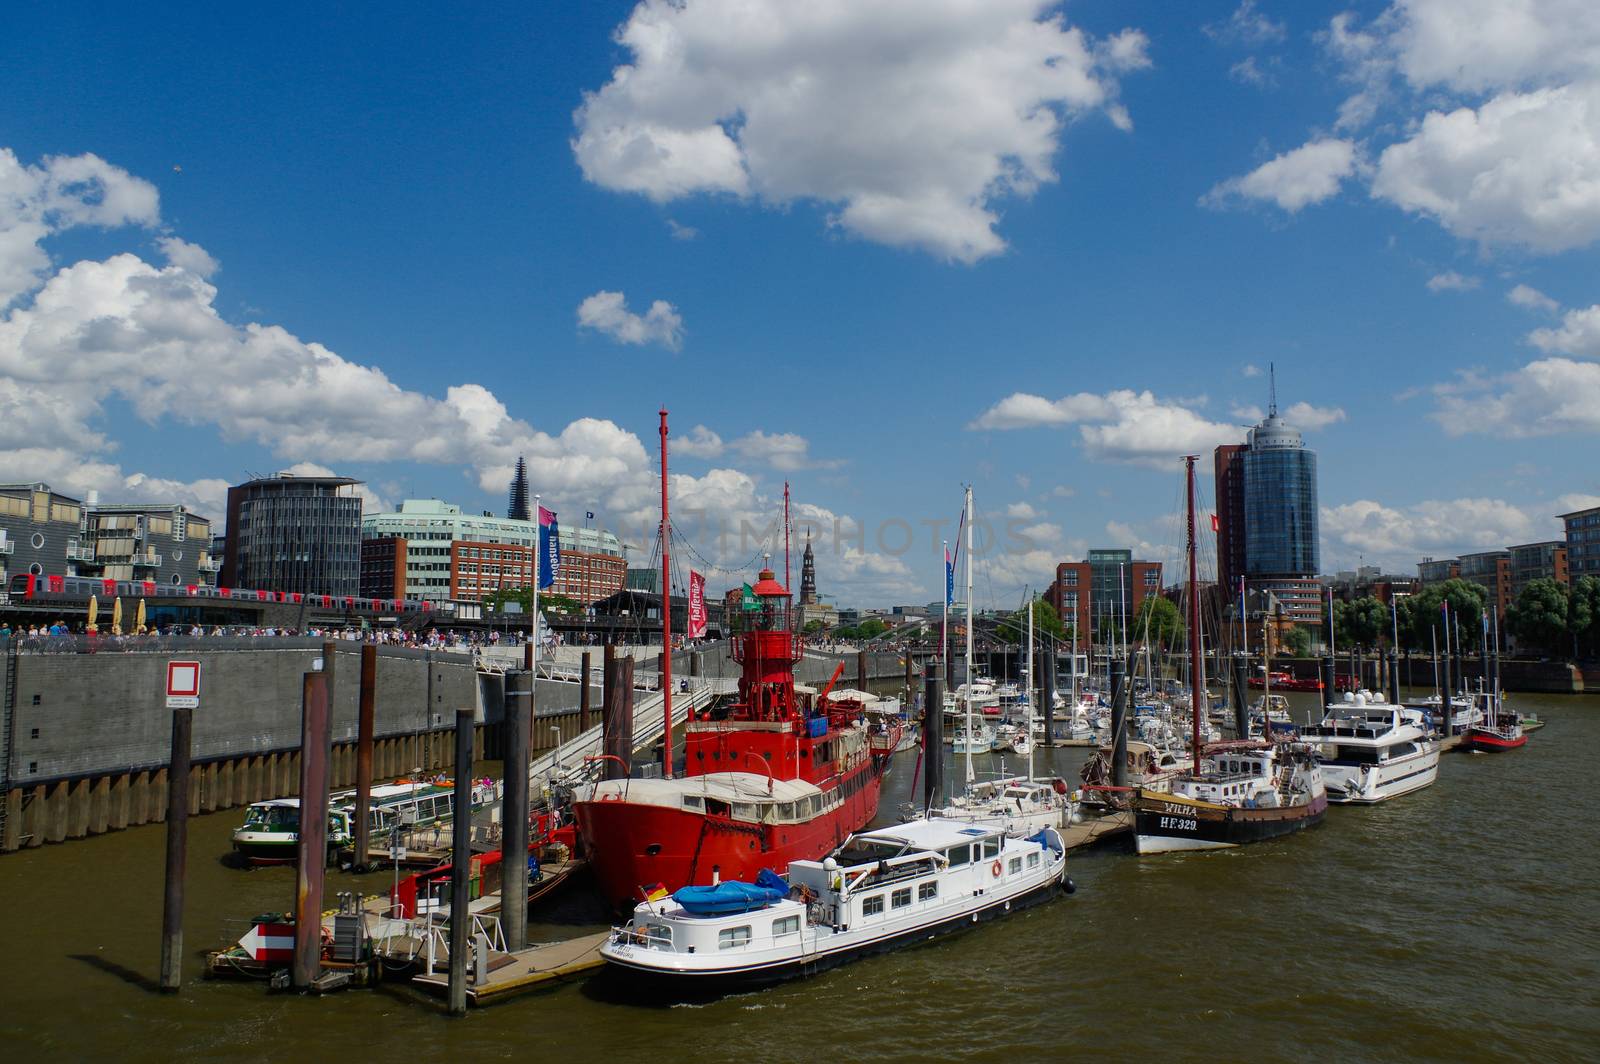 HAMBURG, GERMANY - JUNE 18, 2015: Landungsbruecken of St. Pauli are a very attractive spot for tourists and visitors who enjoy sightseeing in combination with maritime atmosphere by evolutionnow